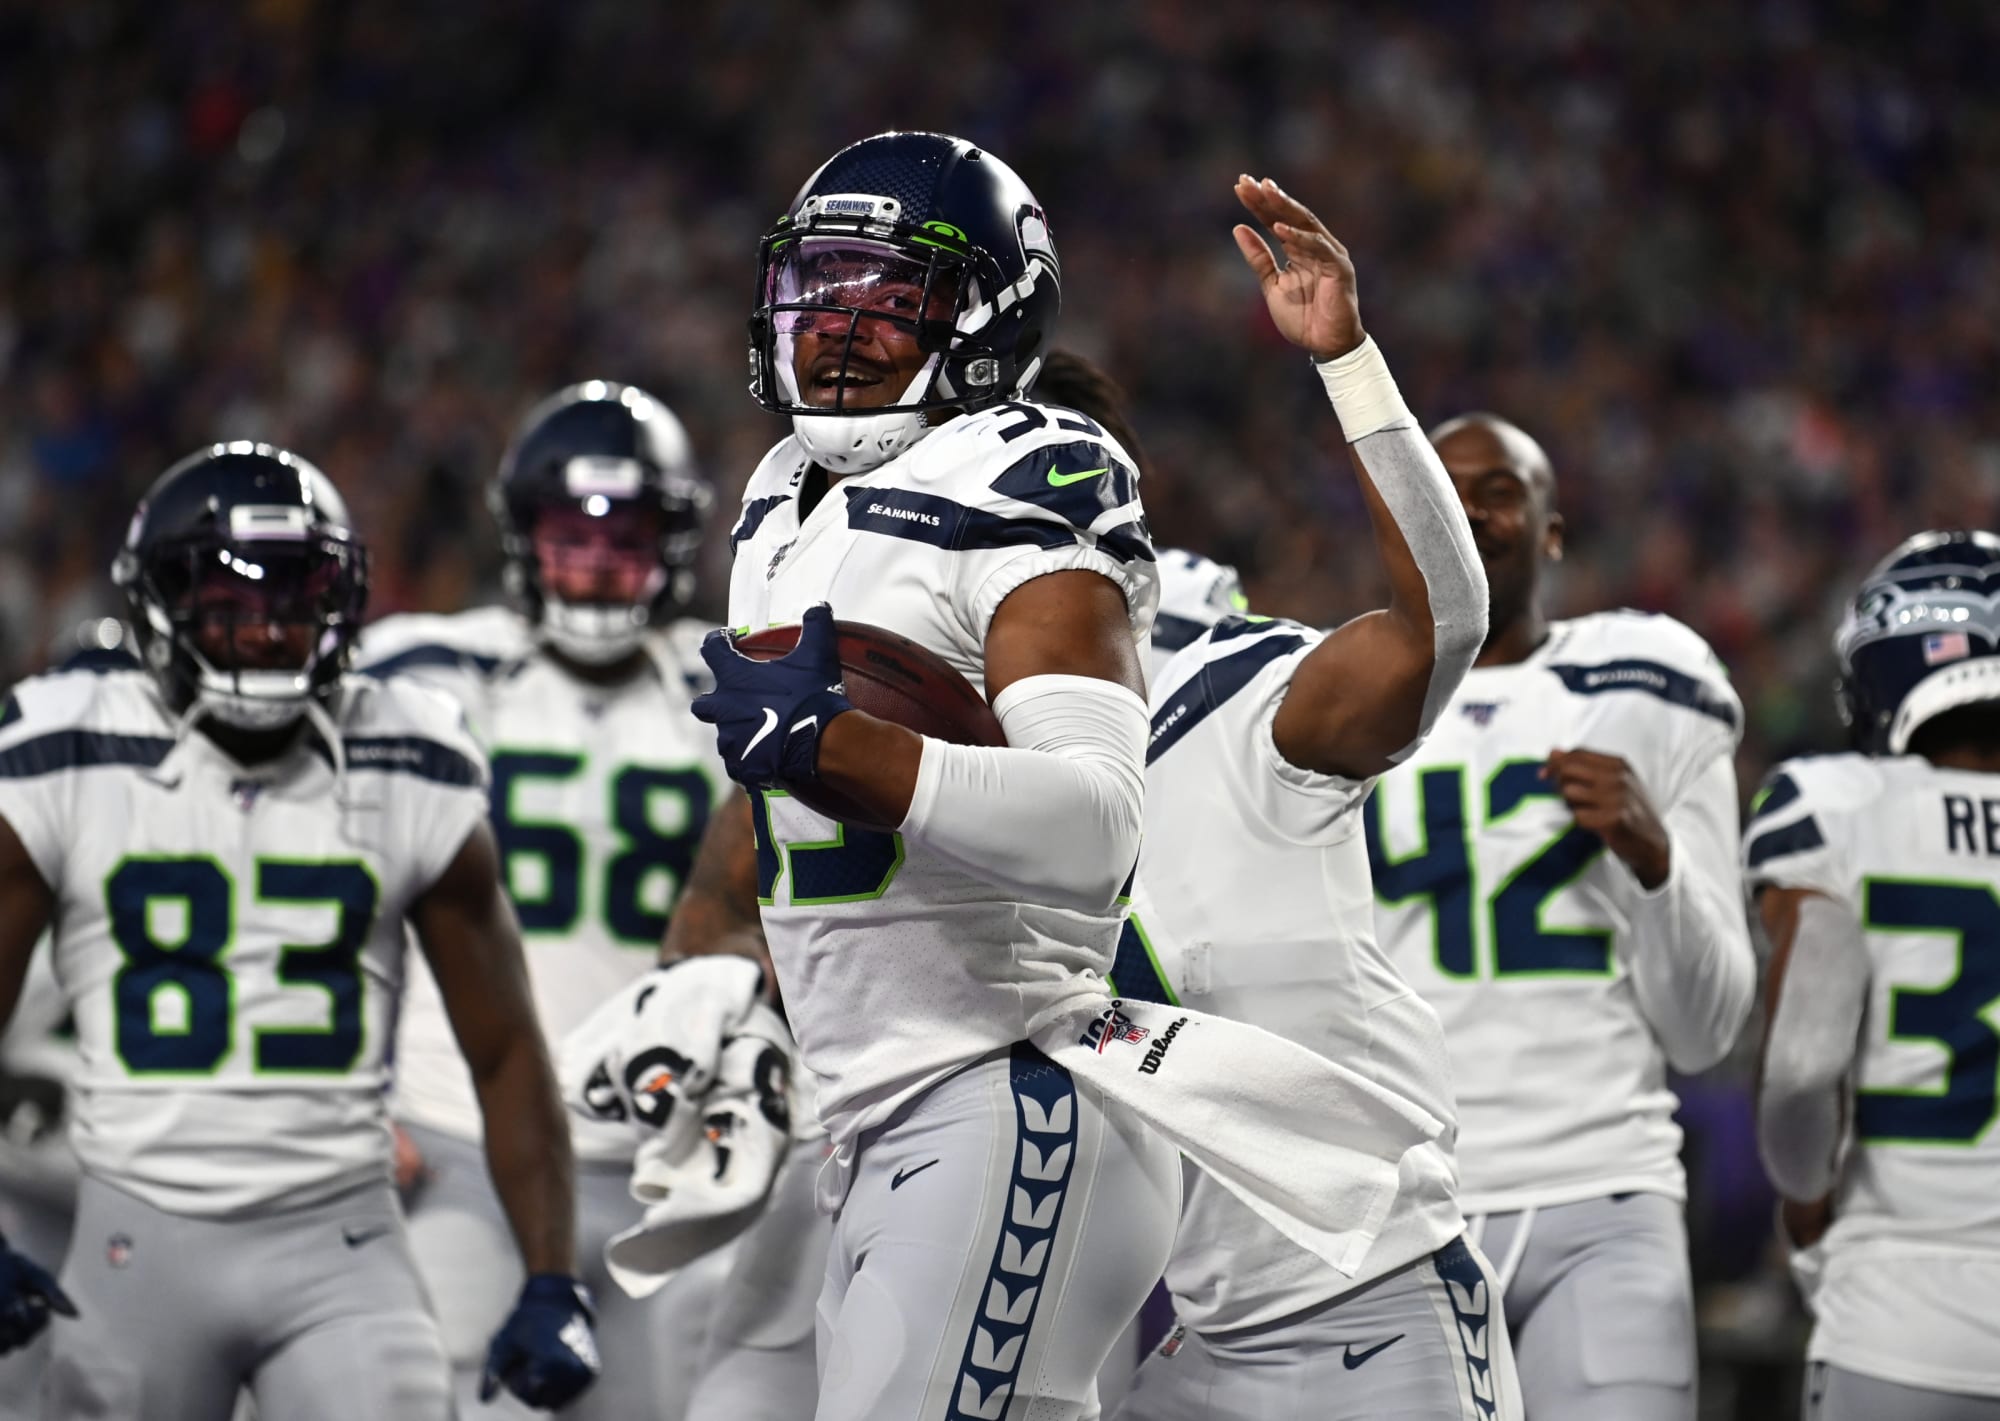 Seahawks early cuts include a surprise DeShawn Shead